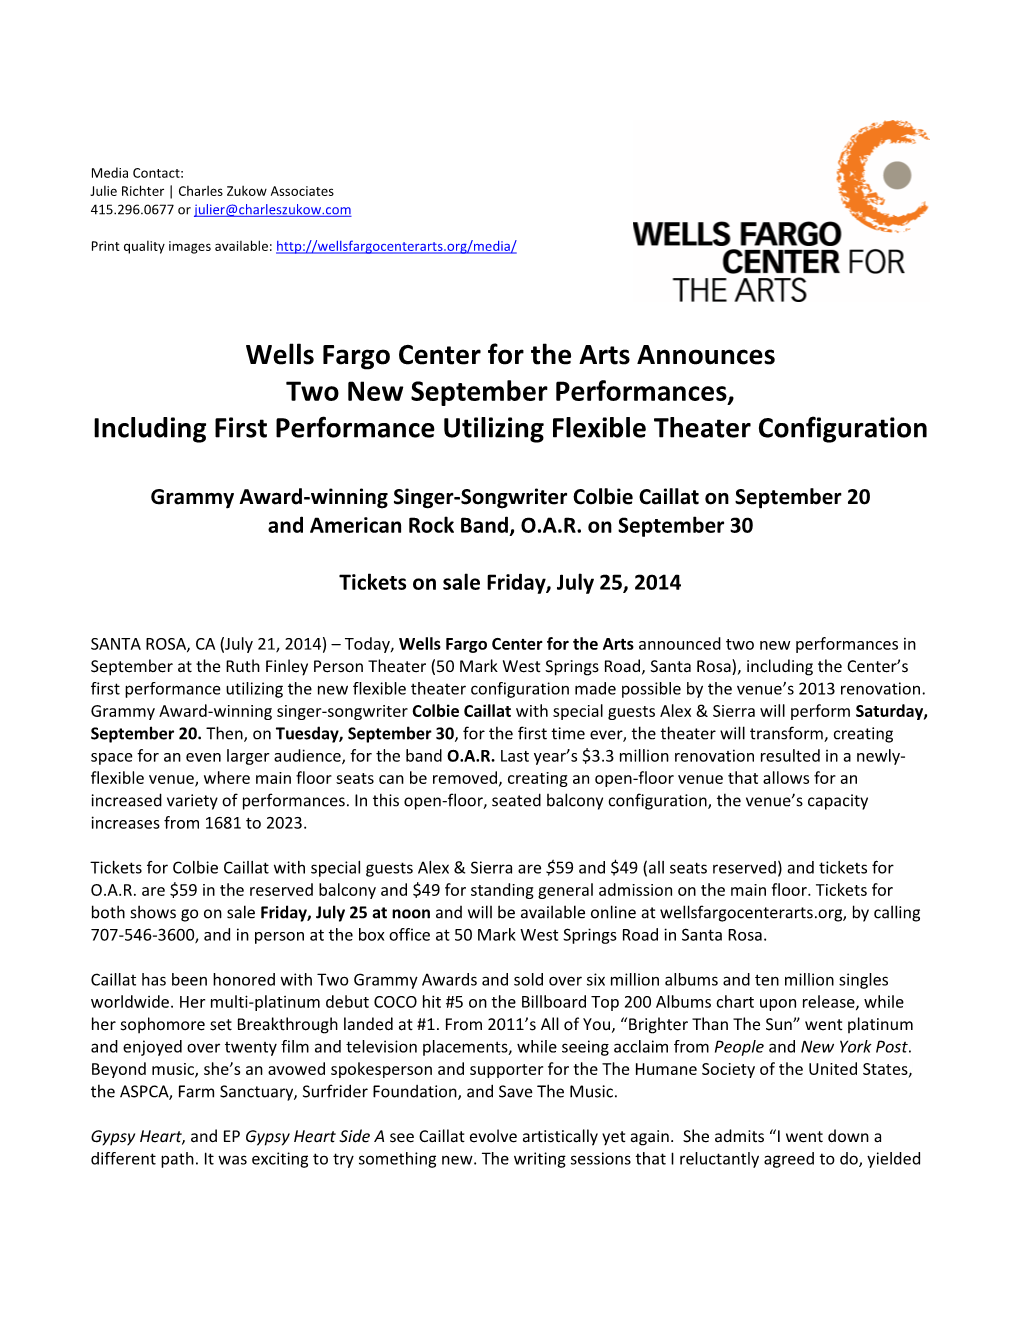 Wells Fargo Center for the Arts Announces Two New September Performances, Including First Performance Utilizing Flexible Theater Configuration